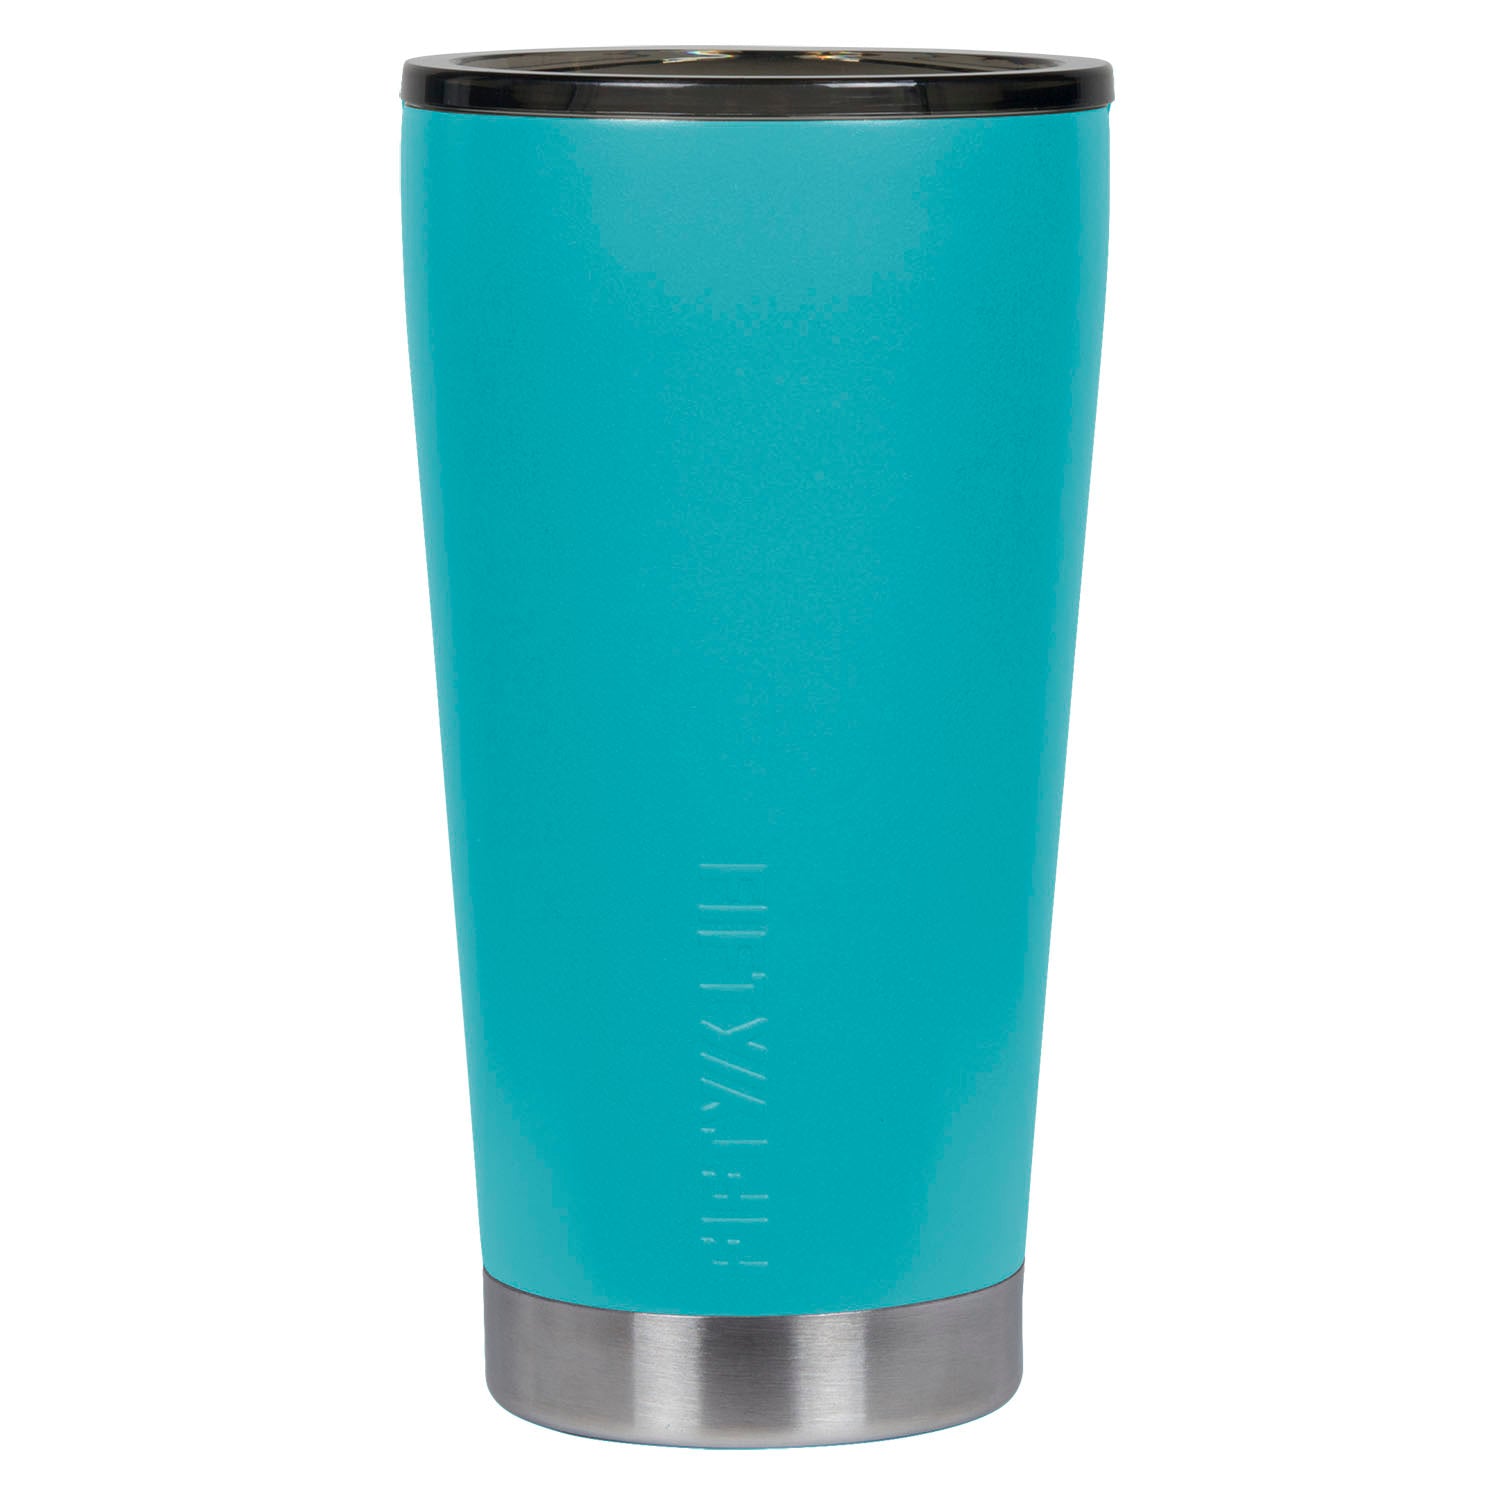 NEW! Our limited-edition Yeti tumblers will keep your smoothie as